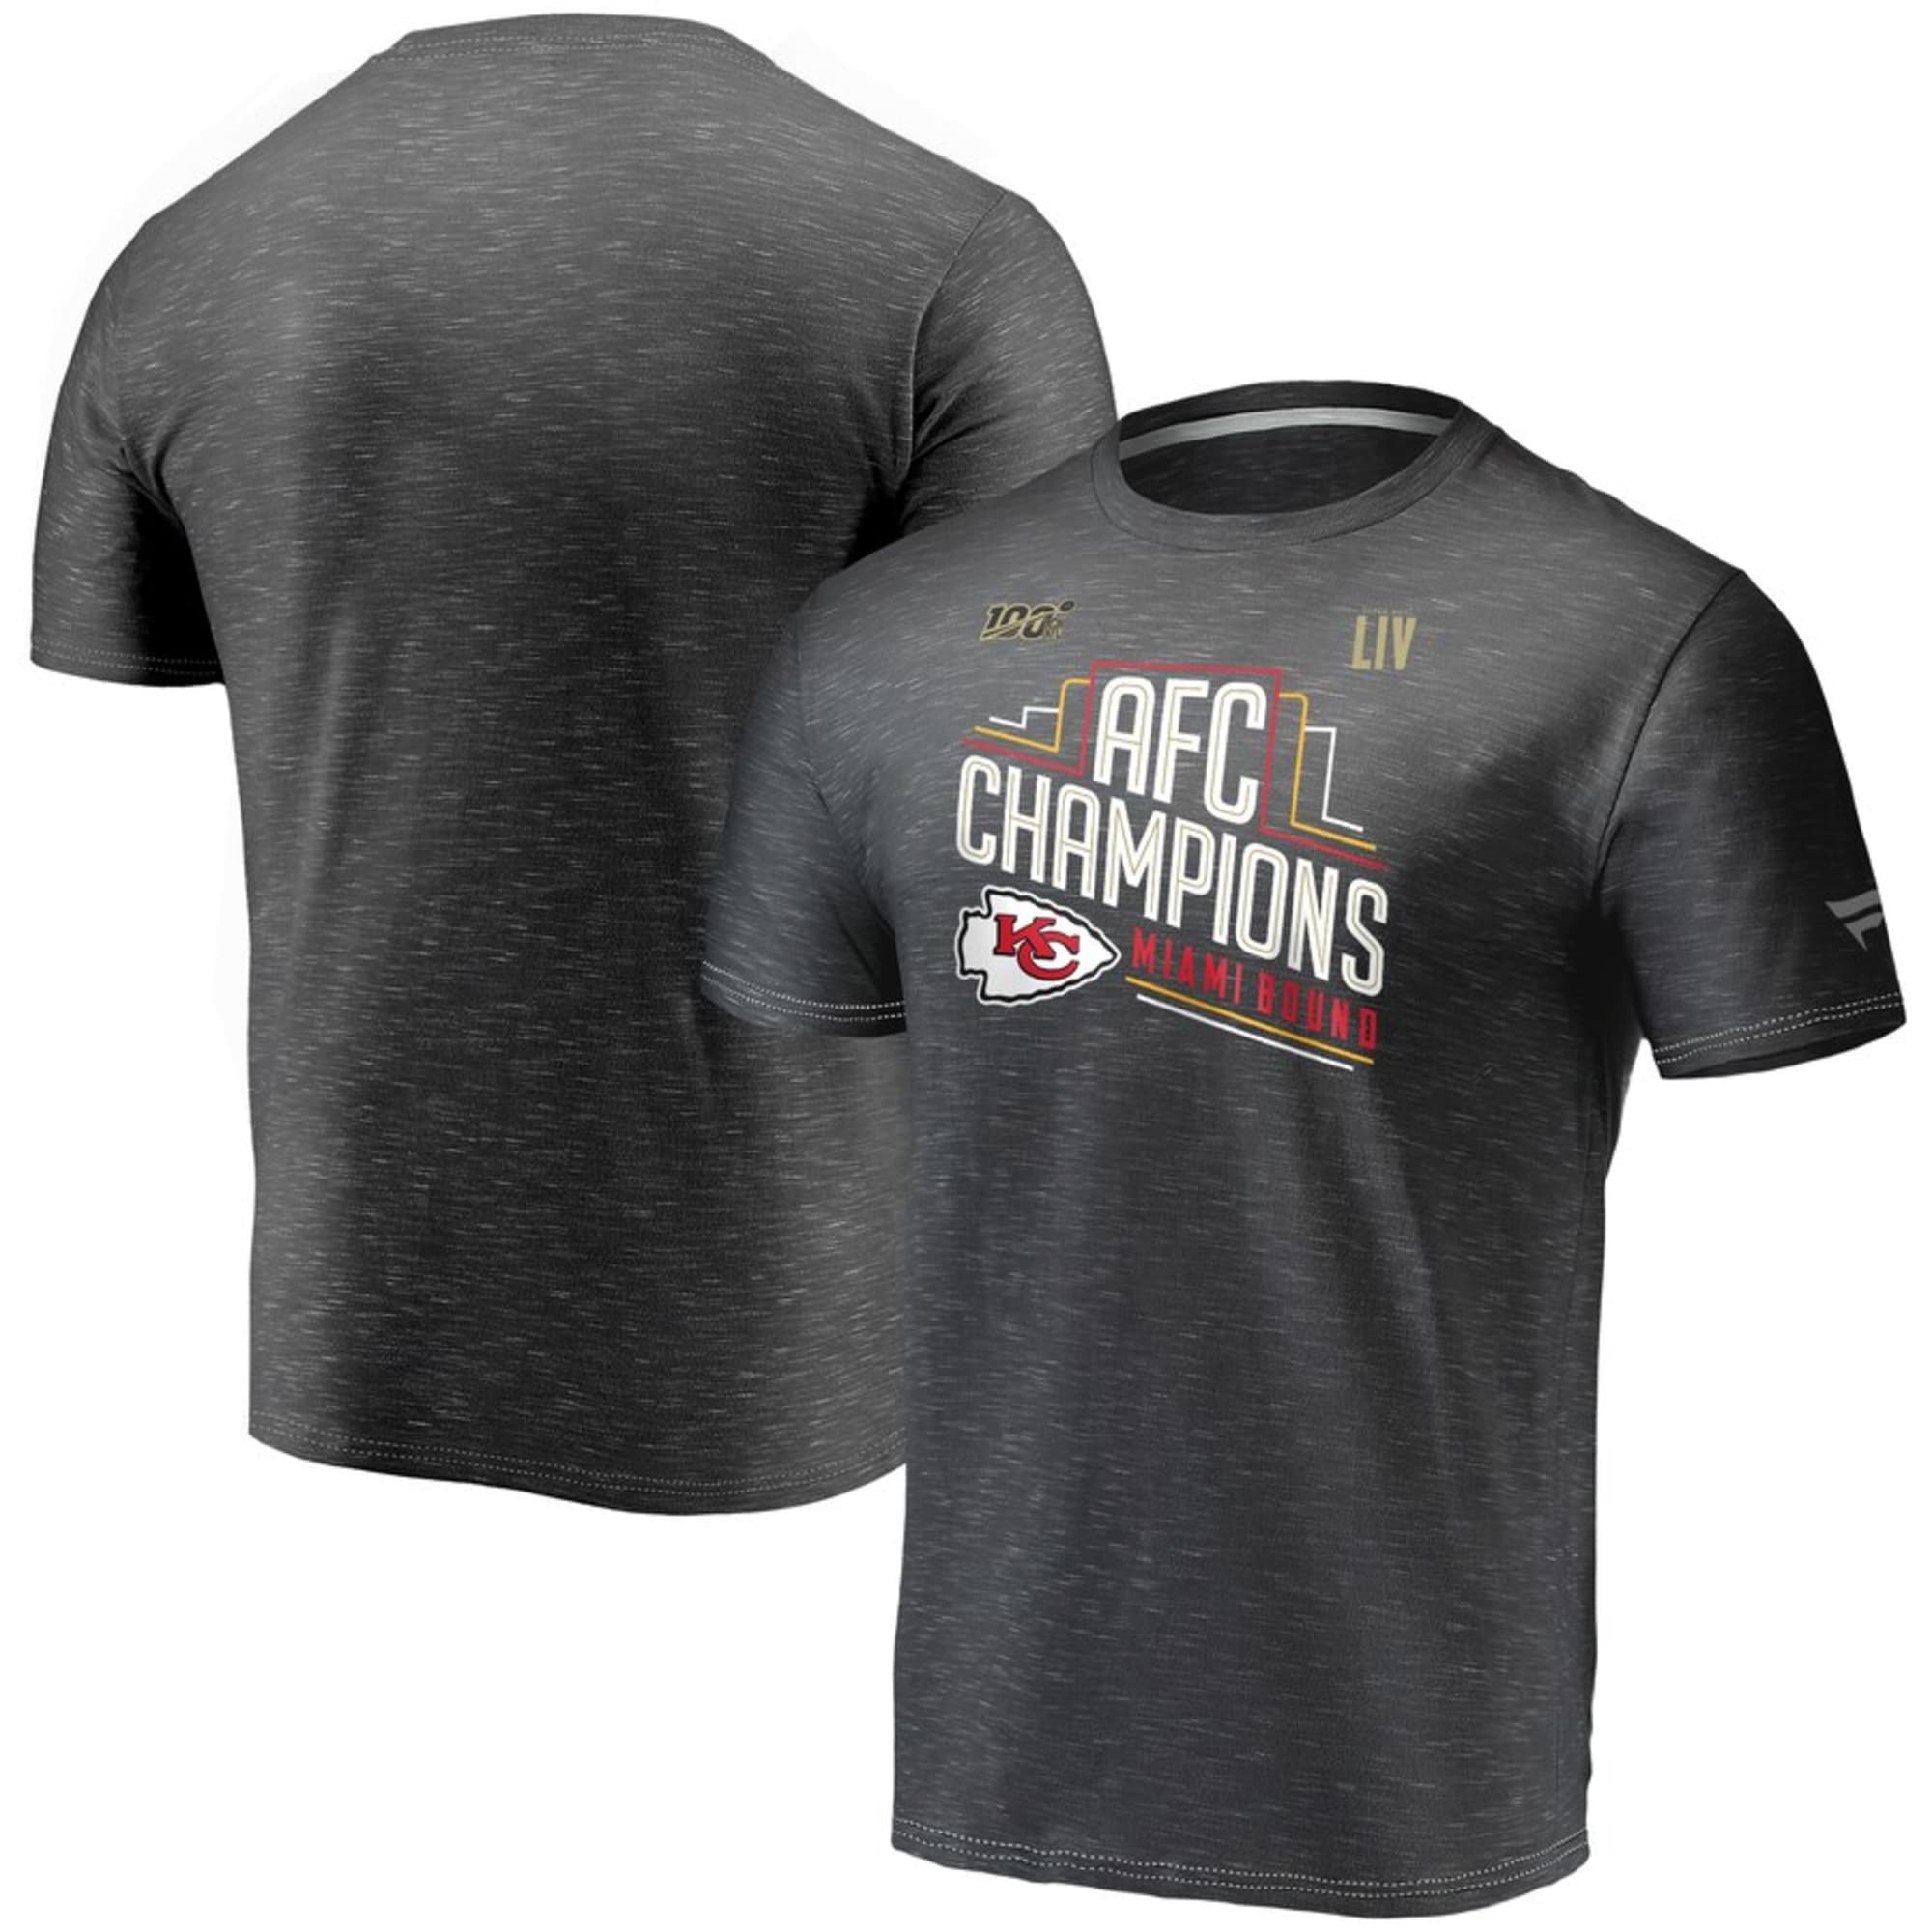 Kansas City Chiefs: Get your official AFC Champs gear now